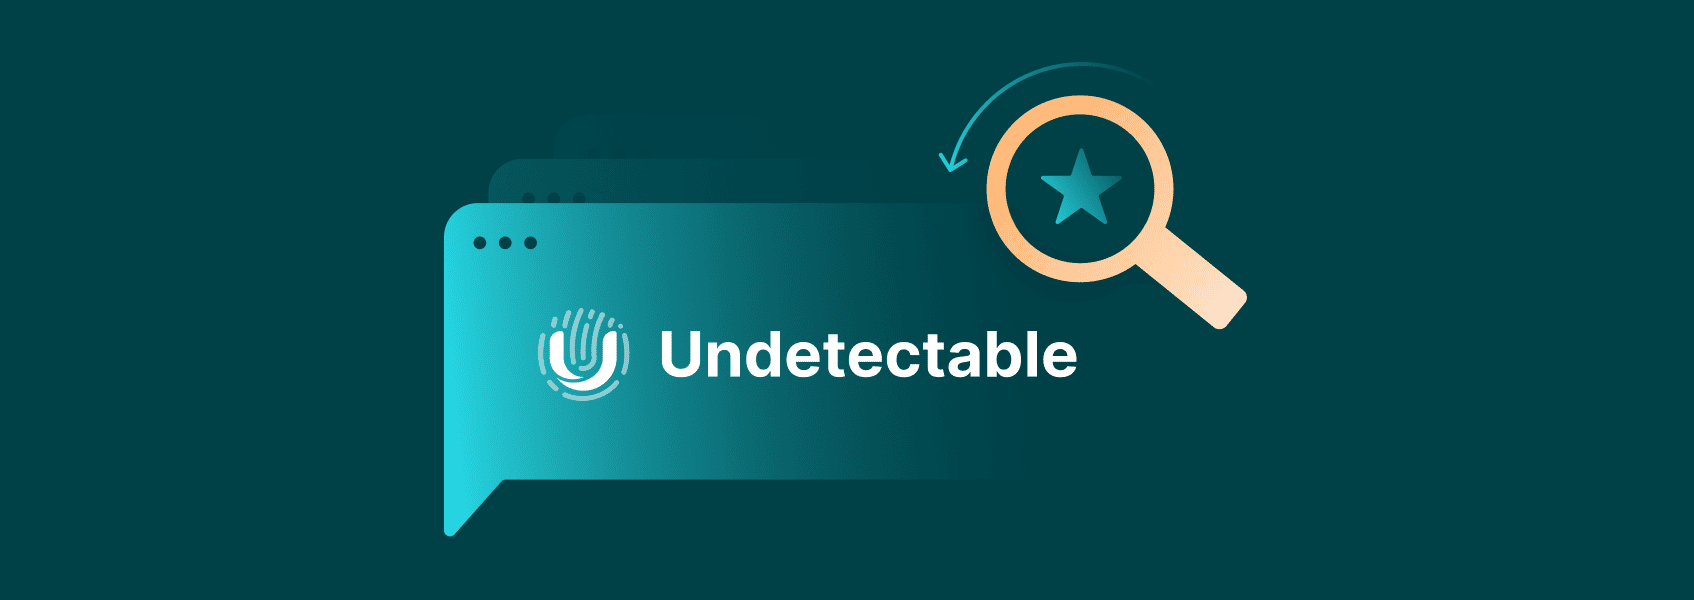 Undetectable.io: Anti-detect Browser Redefined